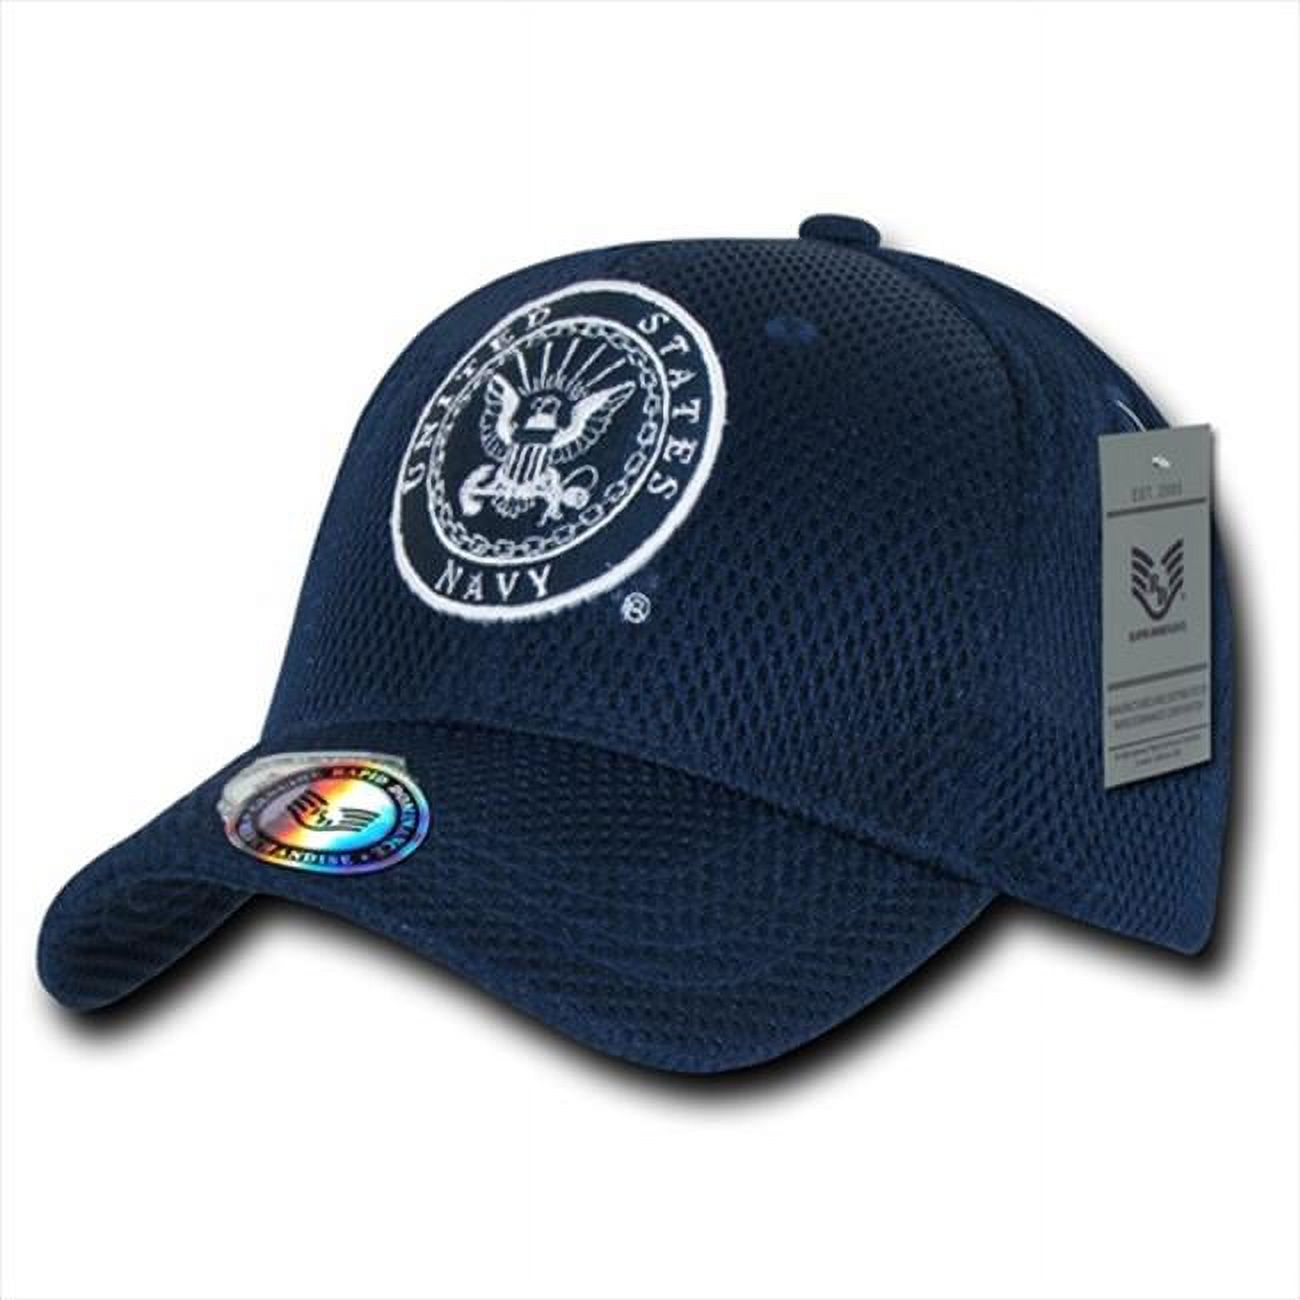 Rapid Dominance S002-NAVY-NVY Air Mesh Military Caps, Navy, Navy - image 1 of 2